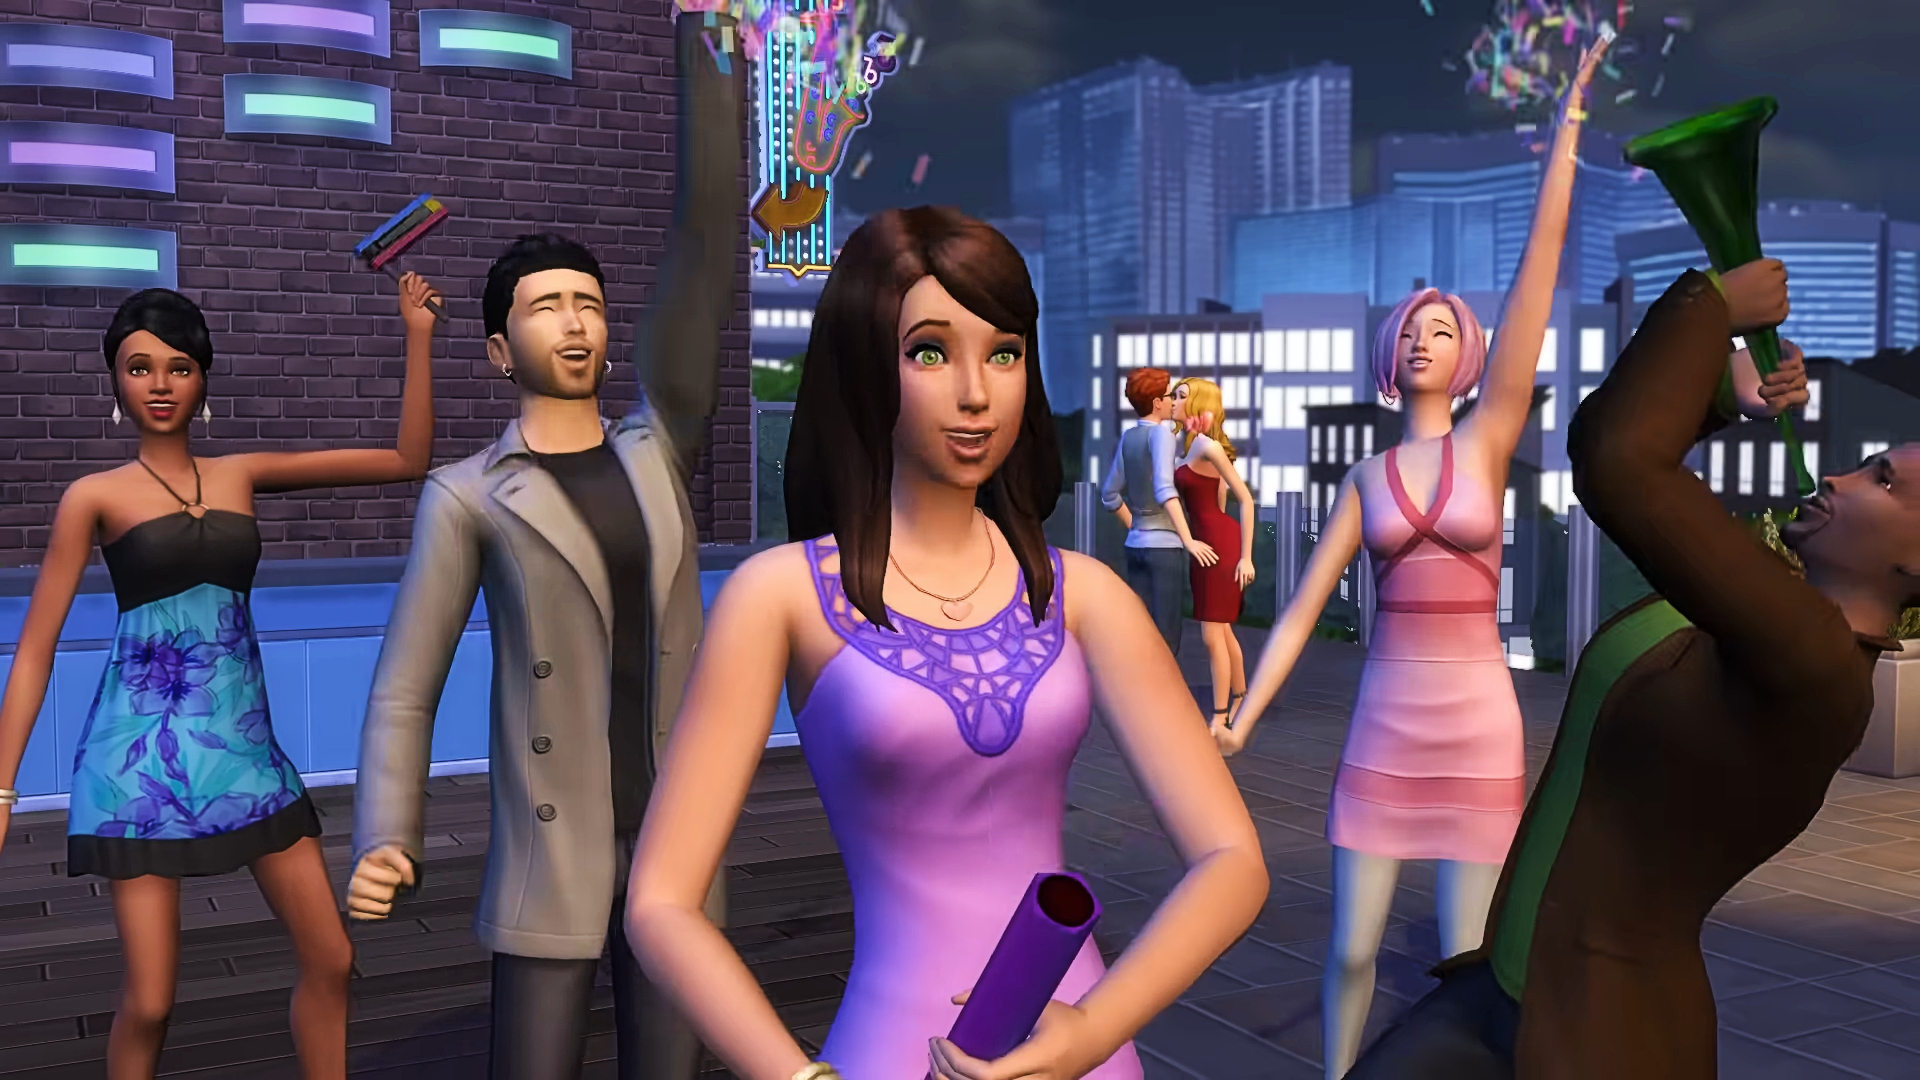 The Sims 4 is going free-to-play: Start date, how to download - Dexerto